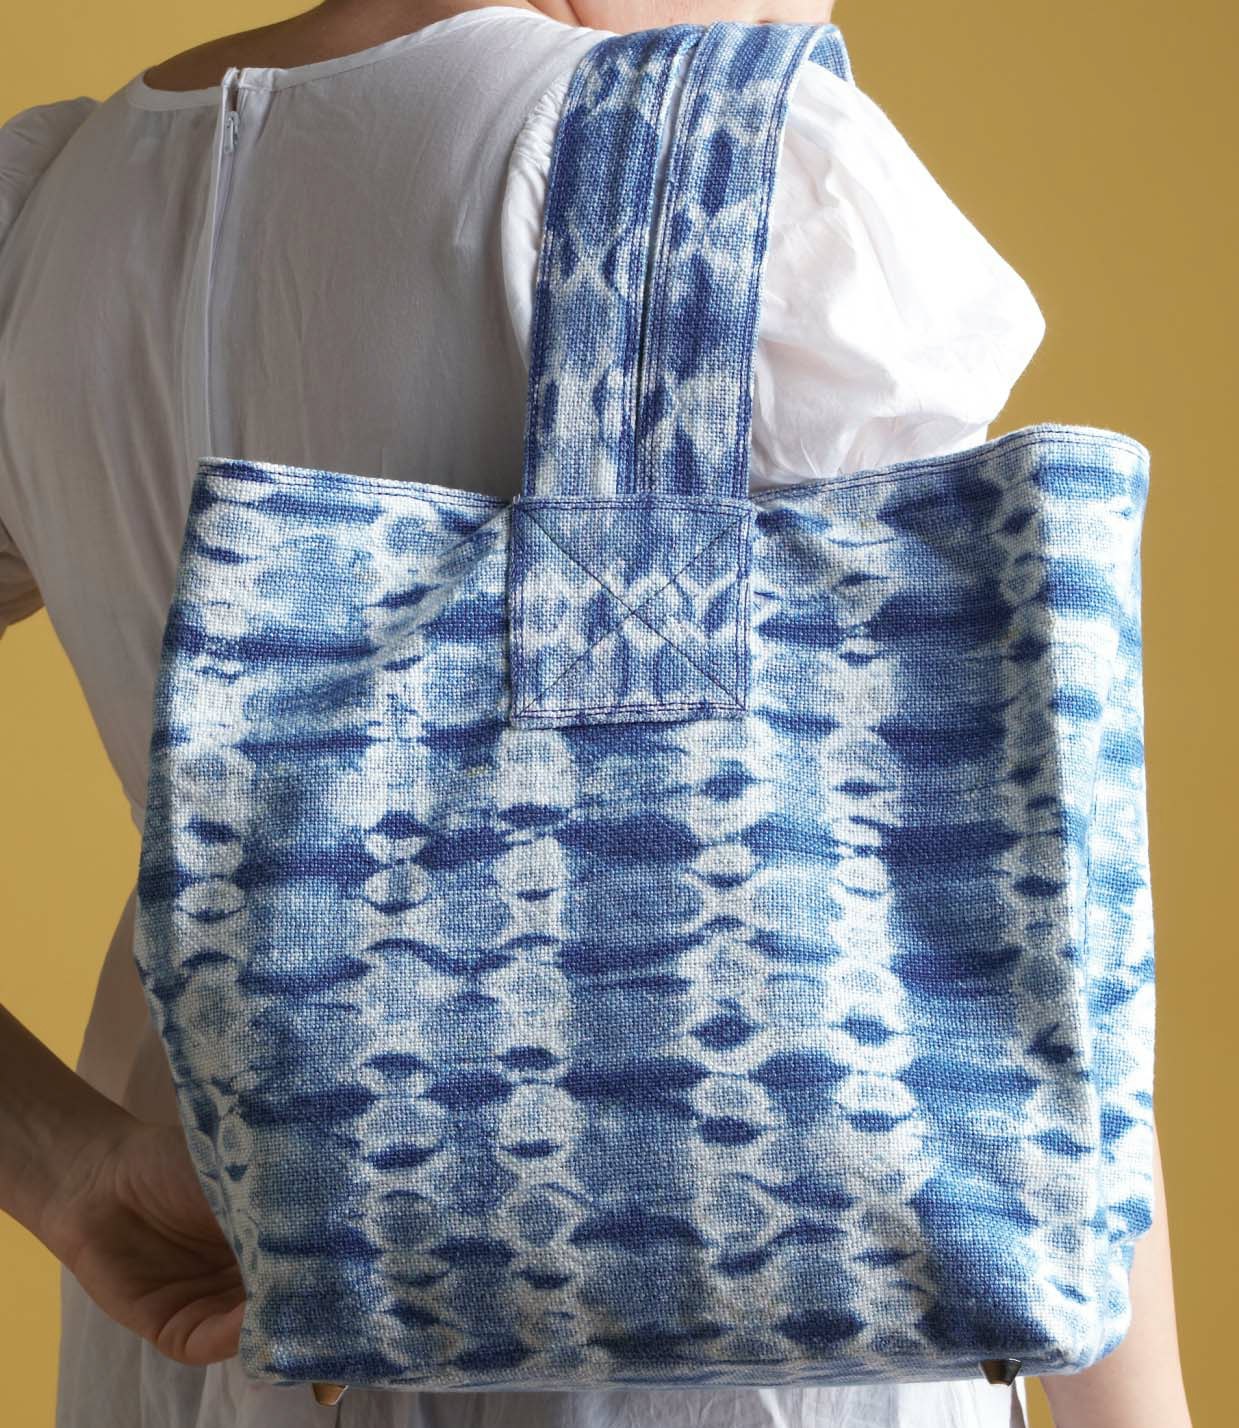 Grab your indigo dye and 4-shaft loom and weave this beautiful, and useful, bag from Patricia Springer. Photo by Joe Coca.